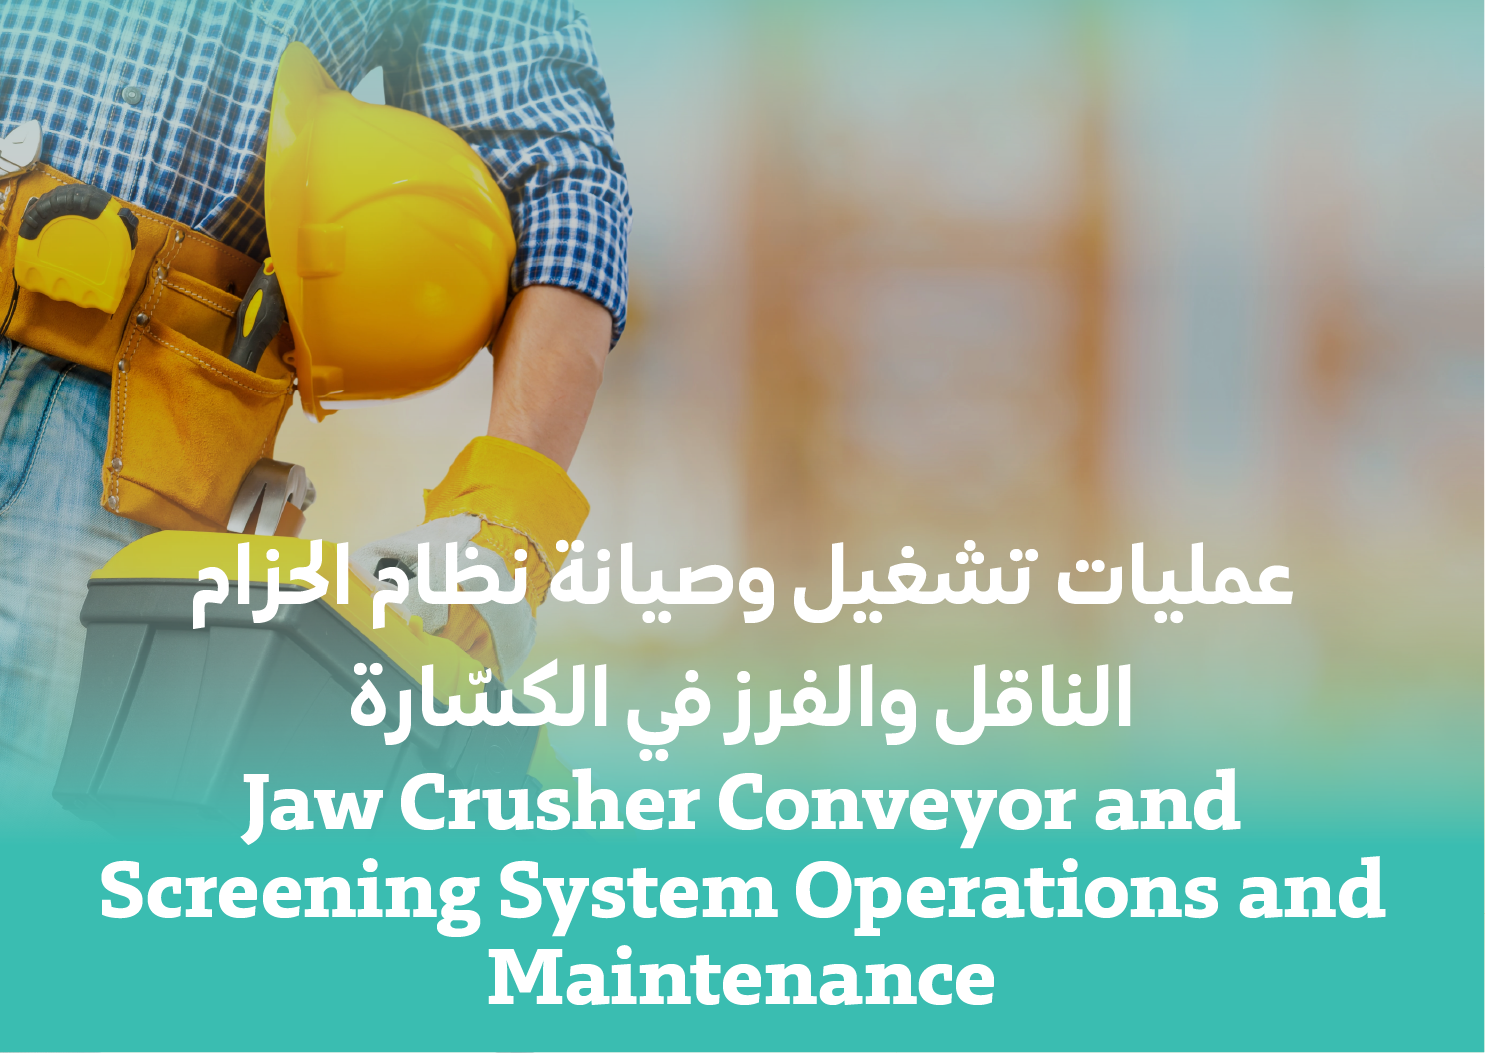 Jaw Crusher Conveyor and Screening System Operations and Maintenance